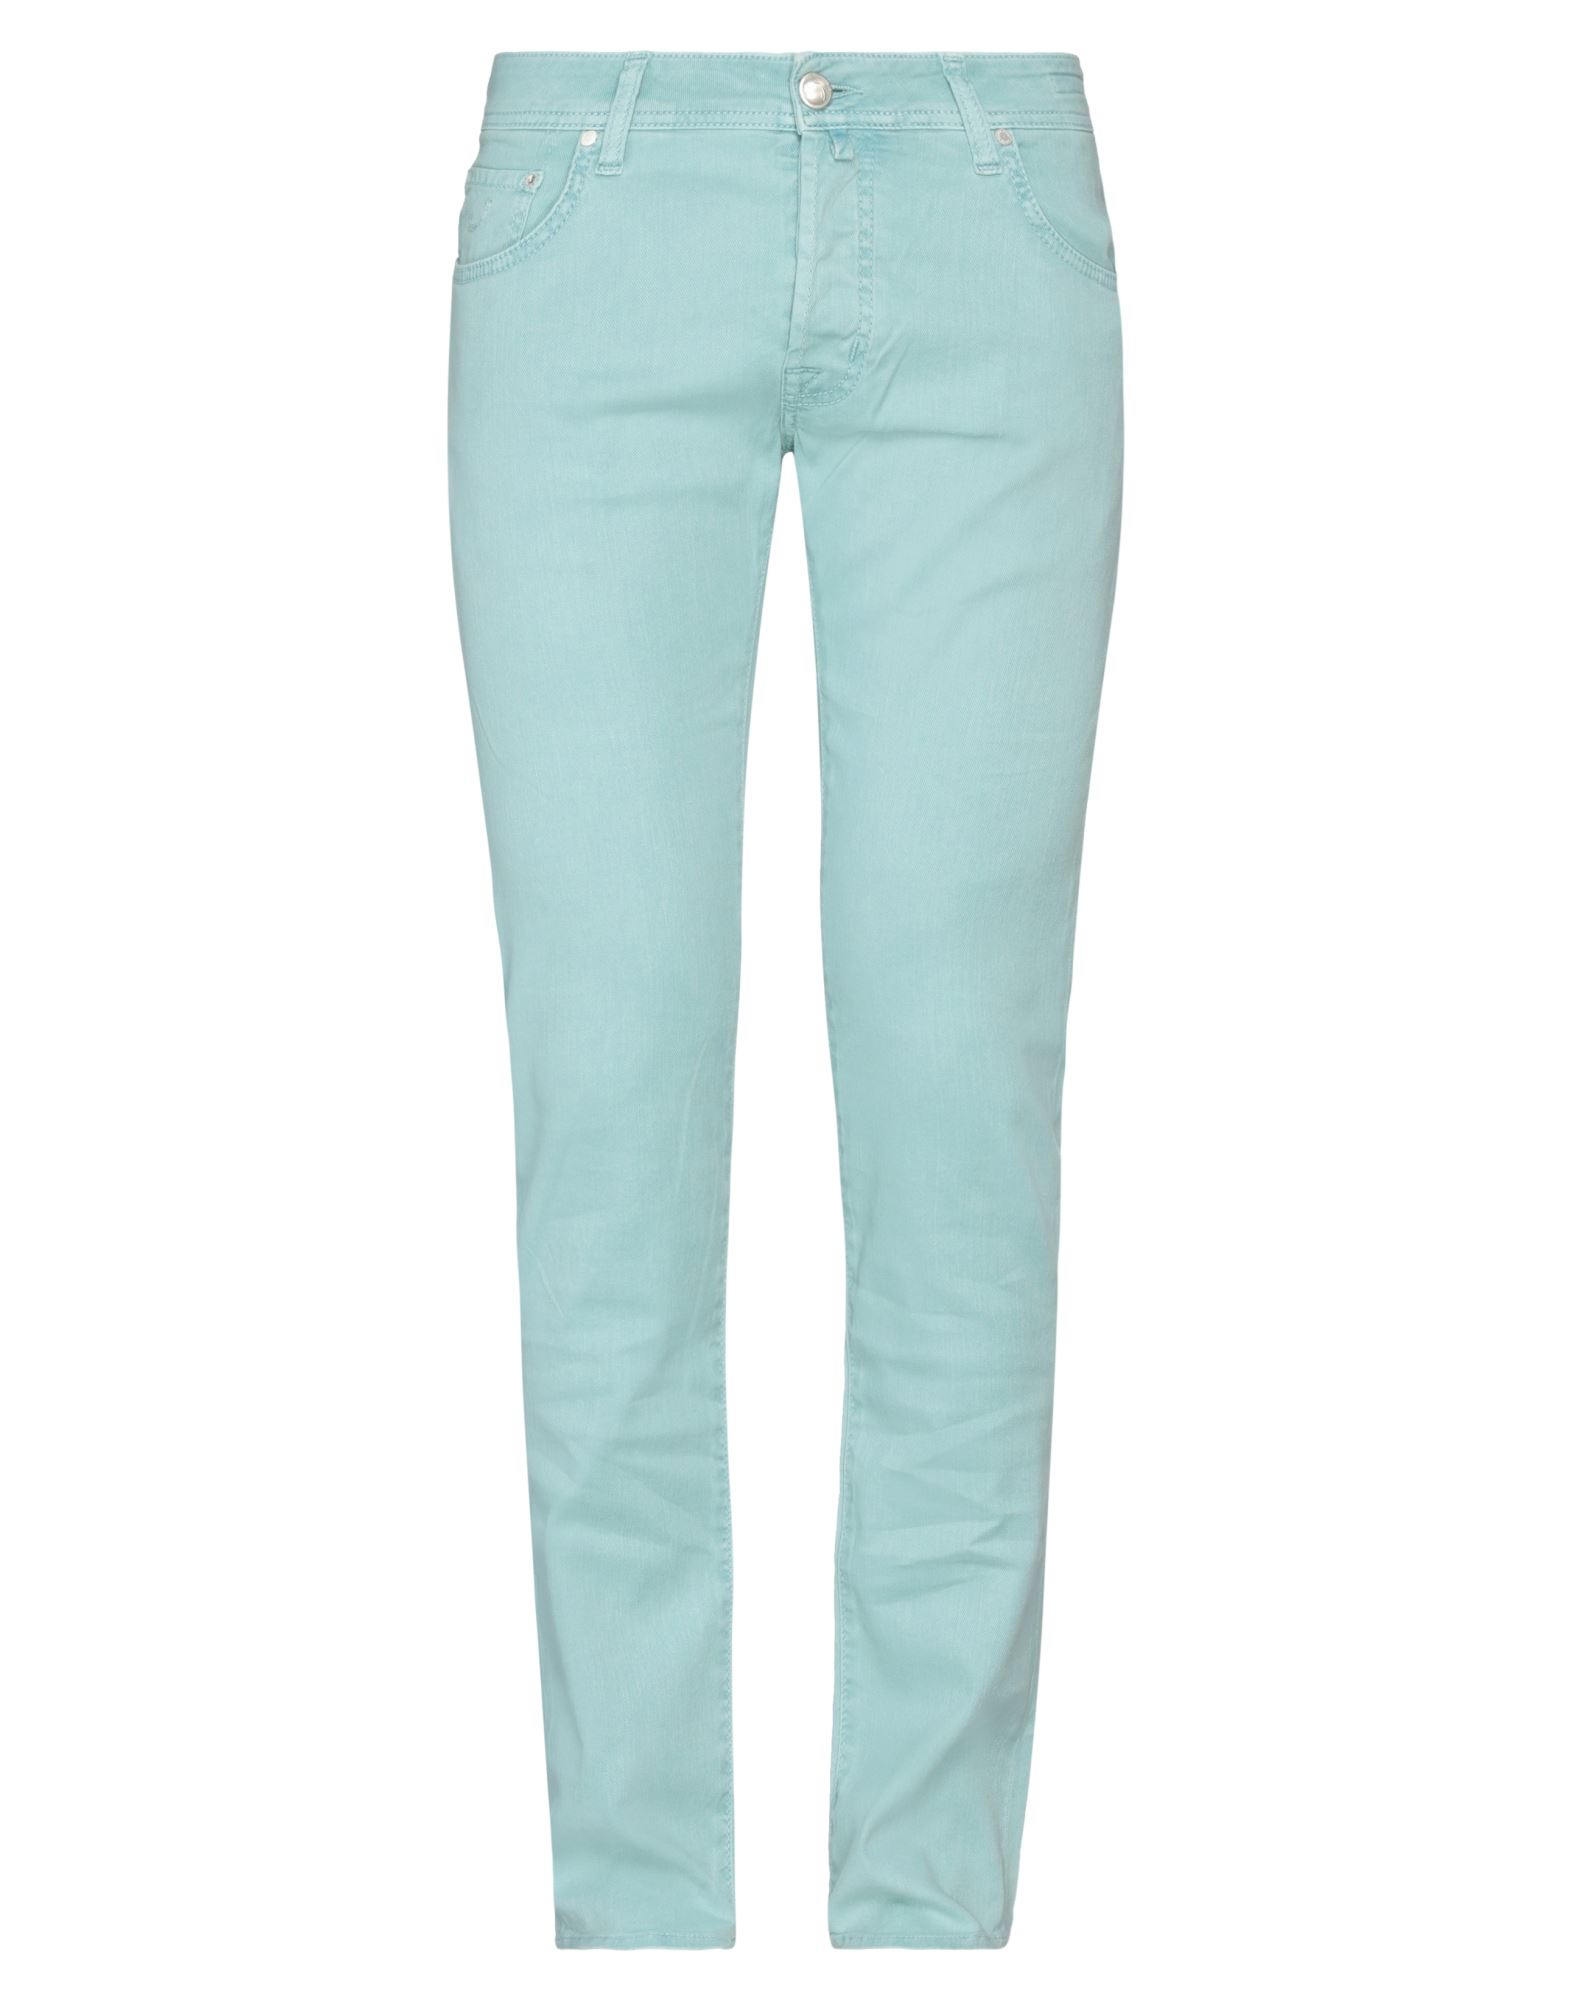 Jacob Cohёn Jeans In Turquoise